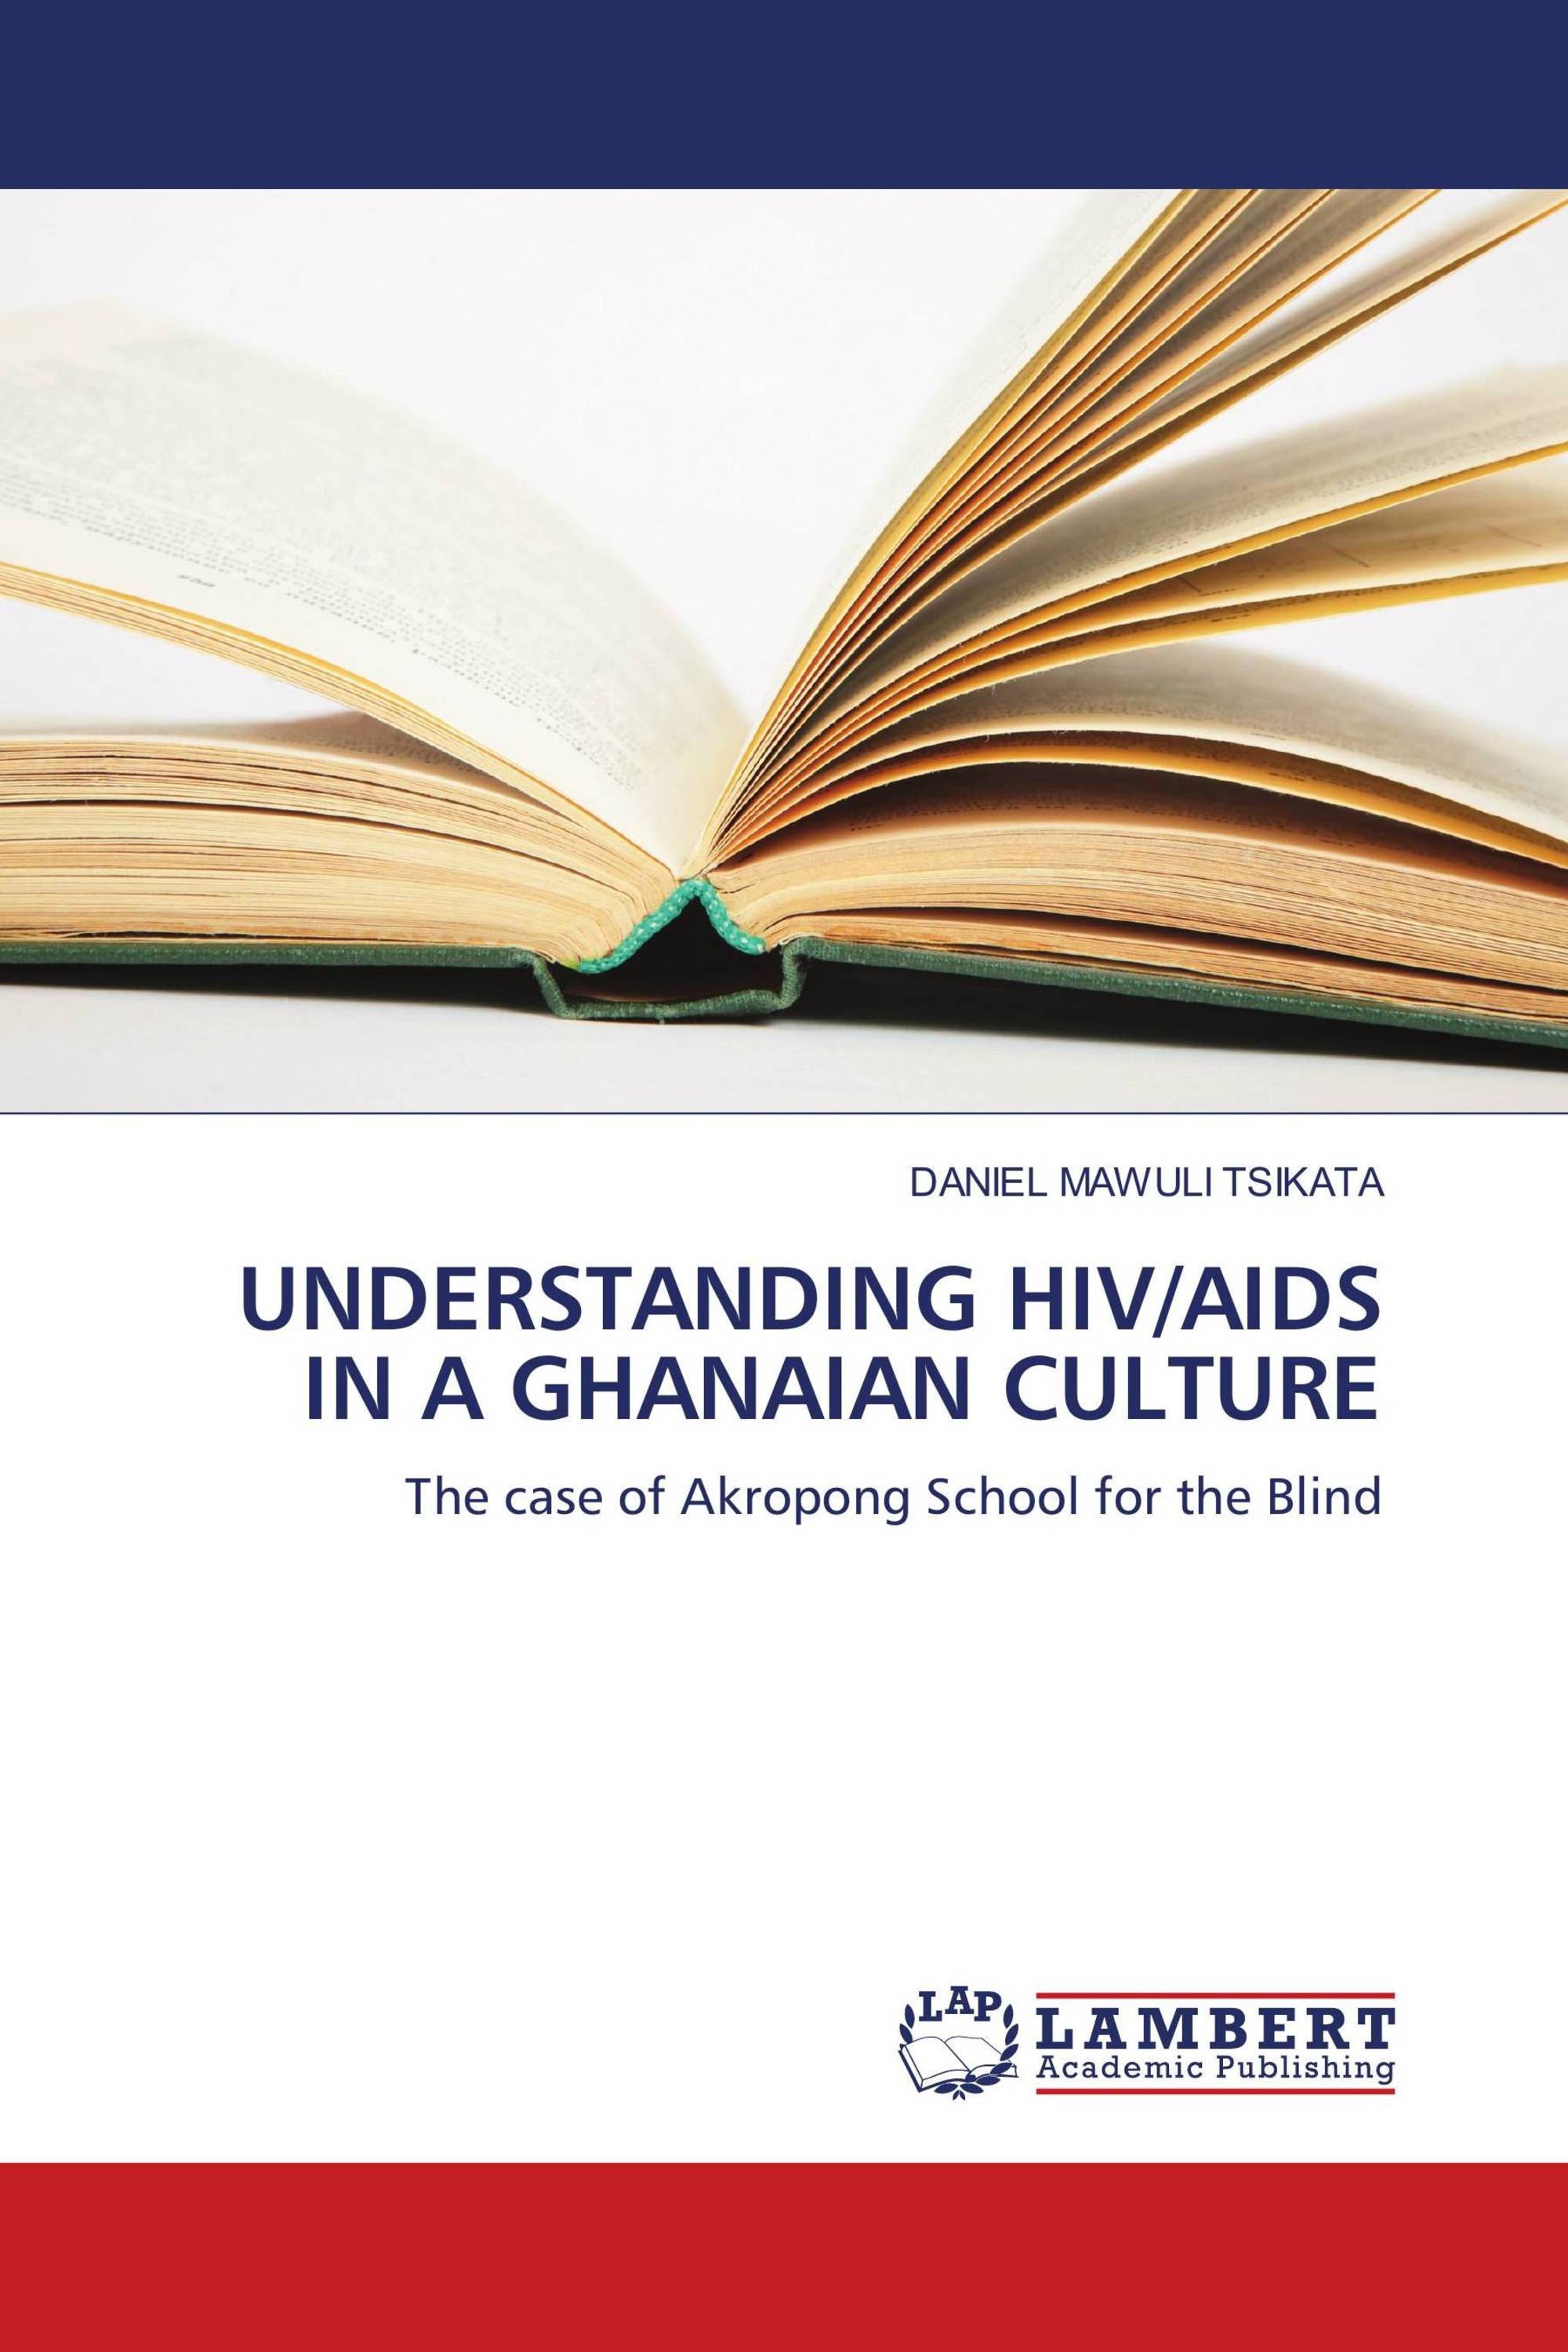 UNDERSTANDING HIV/AIDS IN A GHANAIAN CULTURE